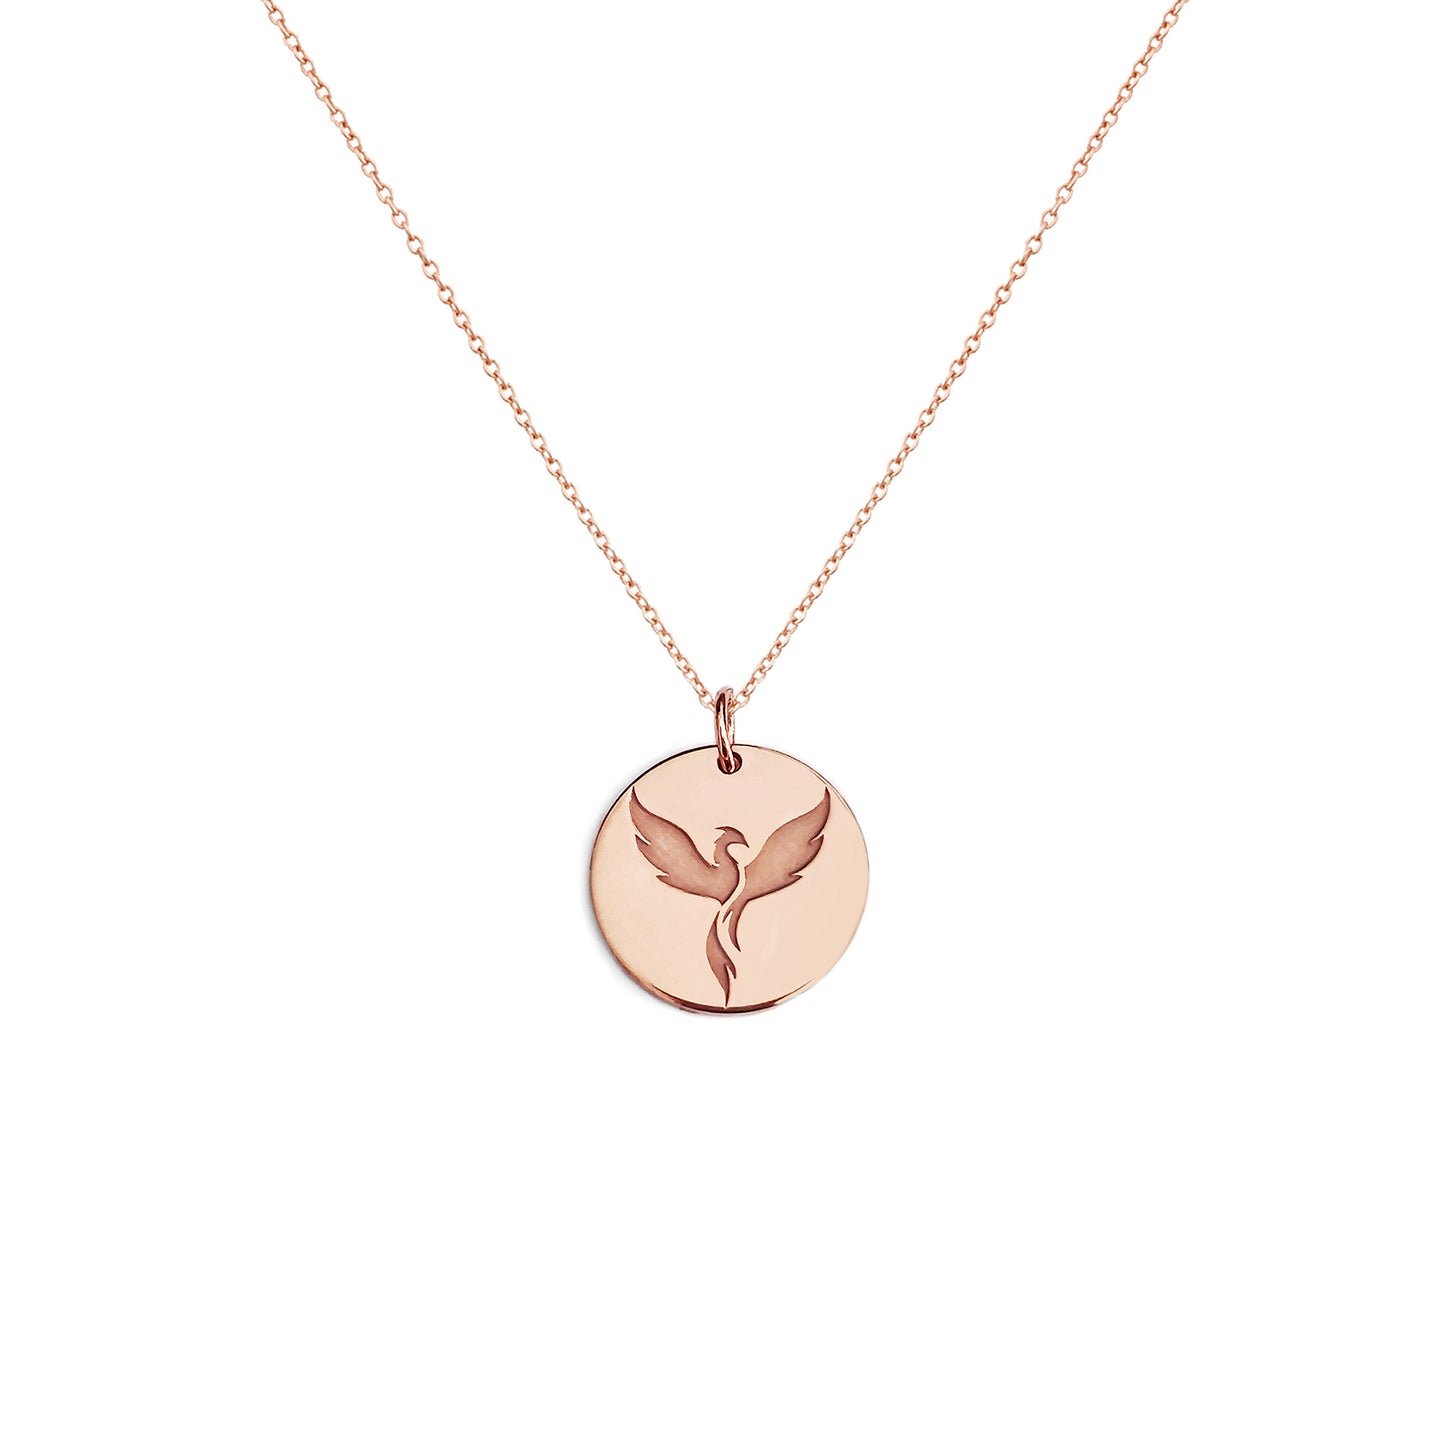 solid rose gold necklace with a 14mm diameter disc pendant engraved with a phoenix firebird